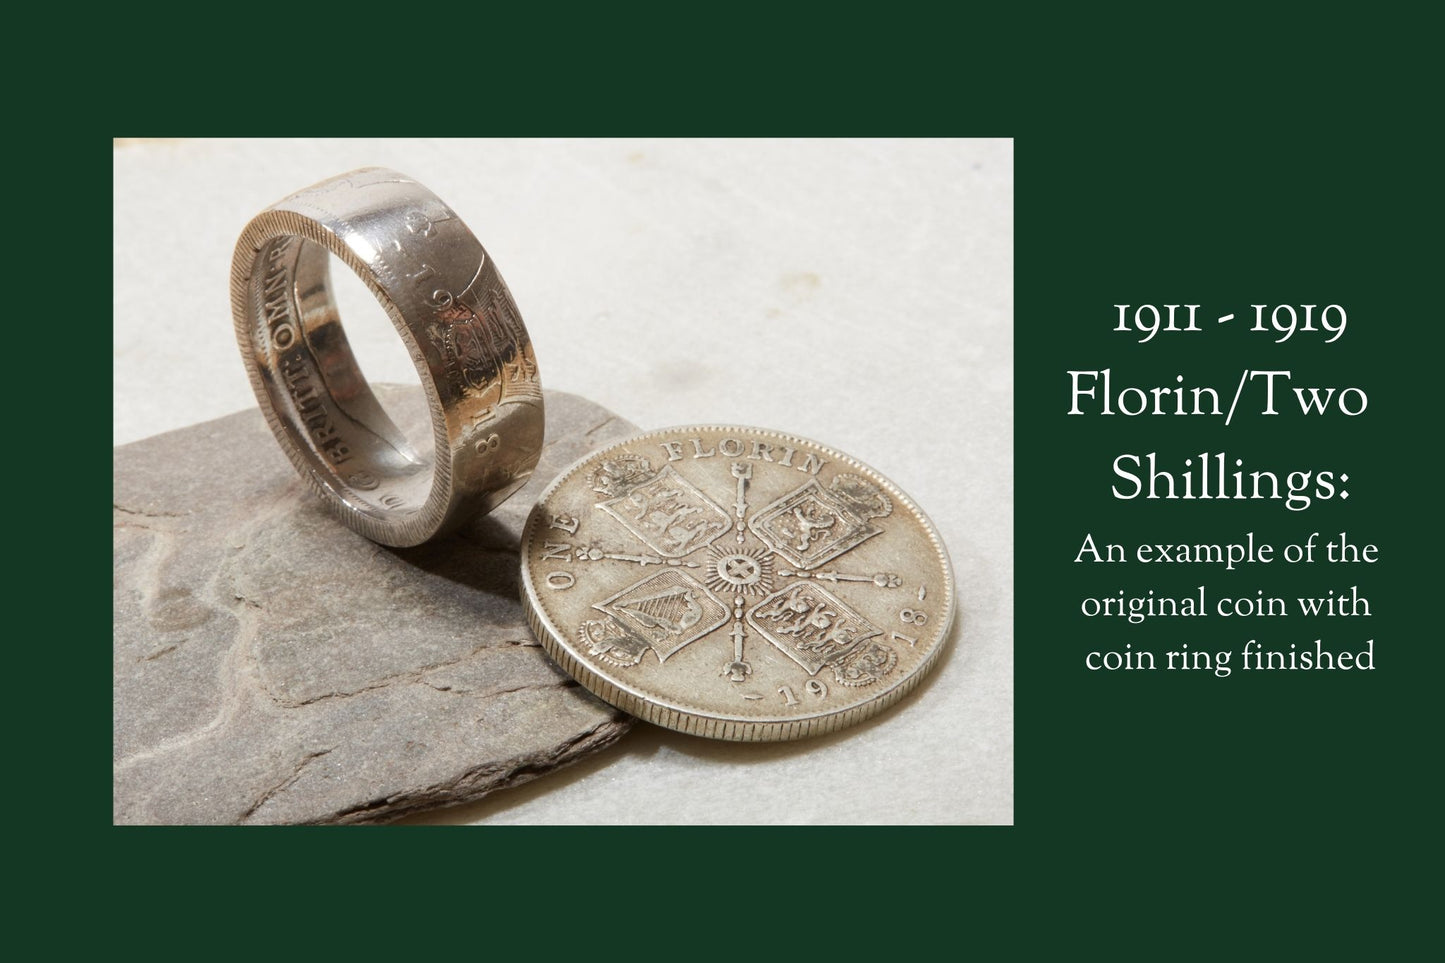 1911 - 1919 florin coin ring on stone with coin